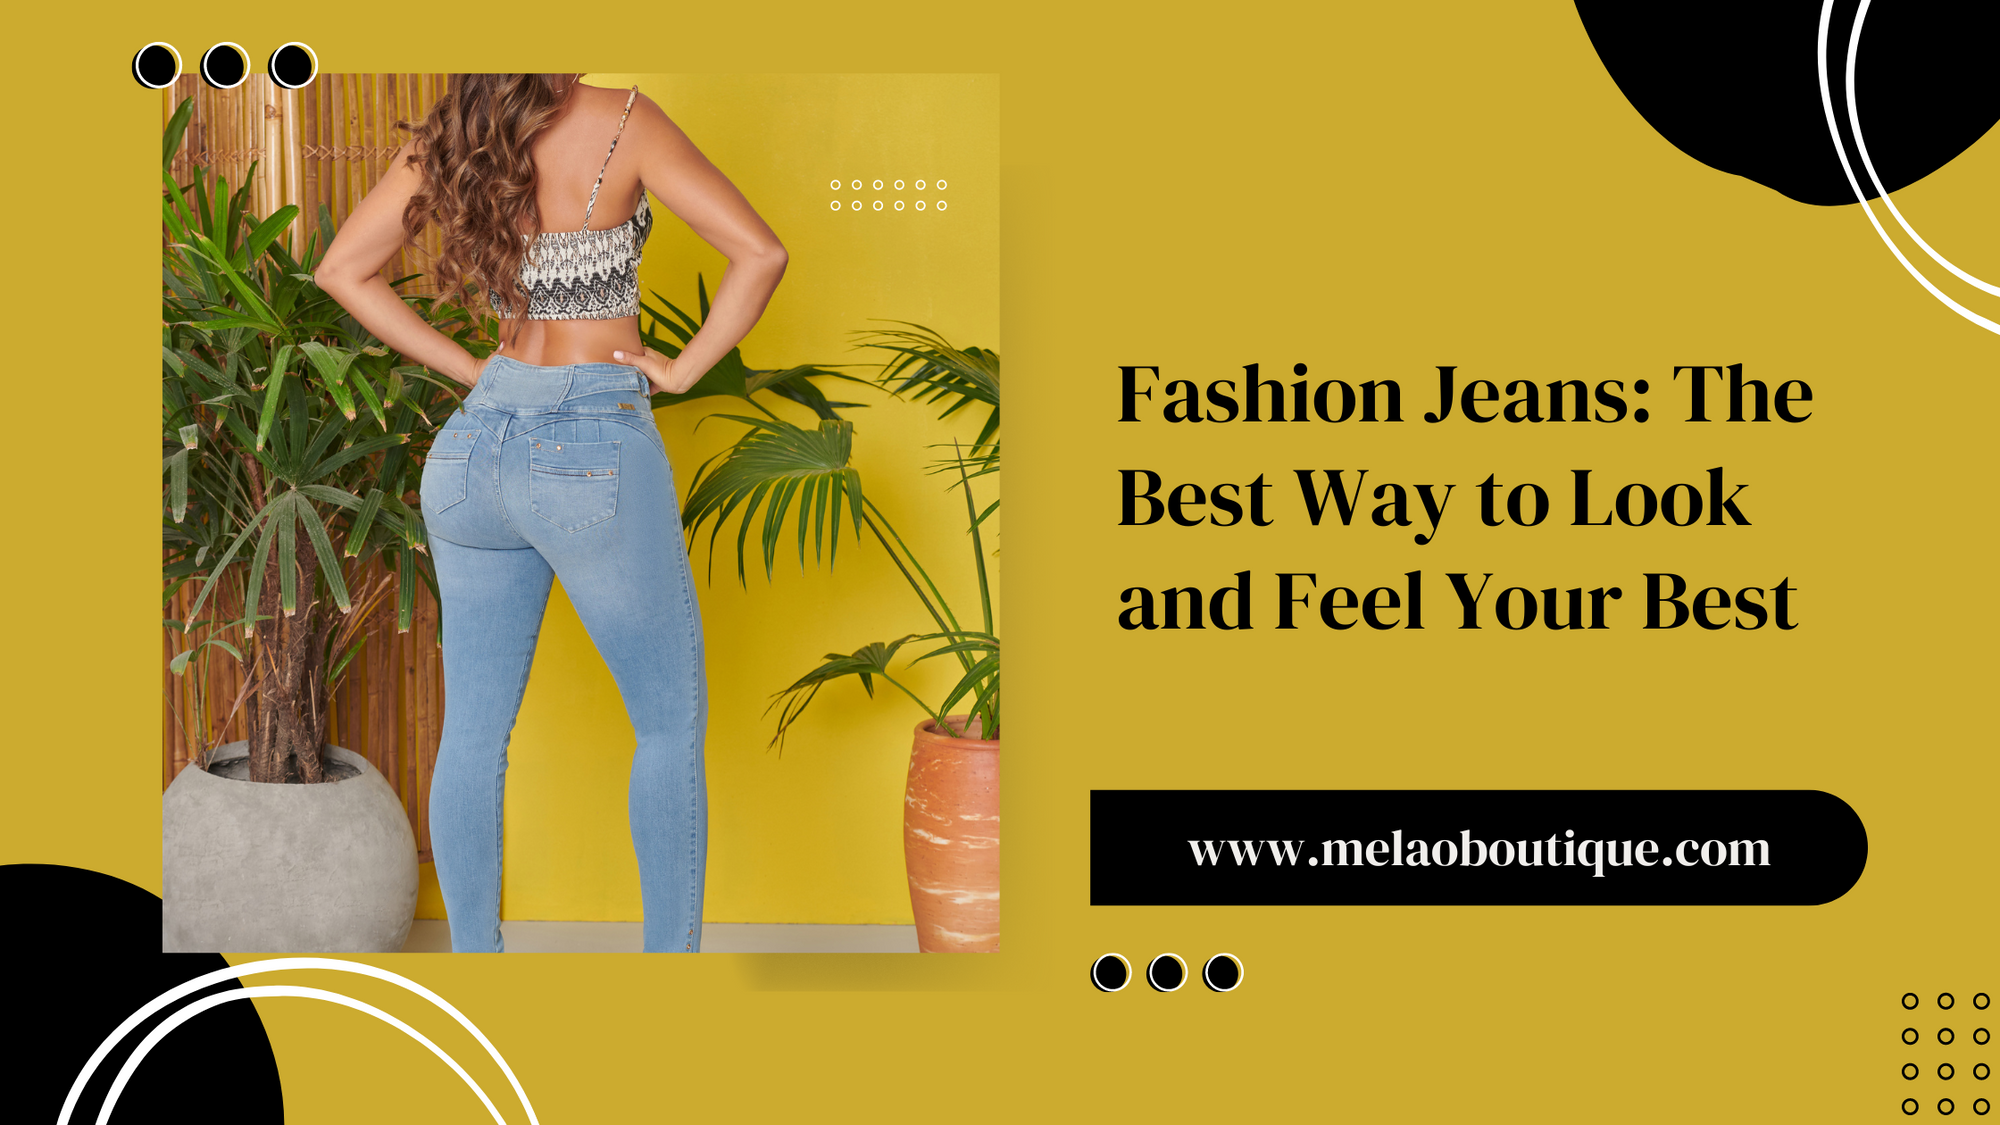 Fashion Jeans The Best Way to Look and Feel Your Best